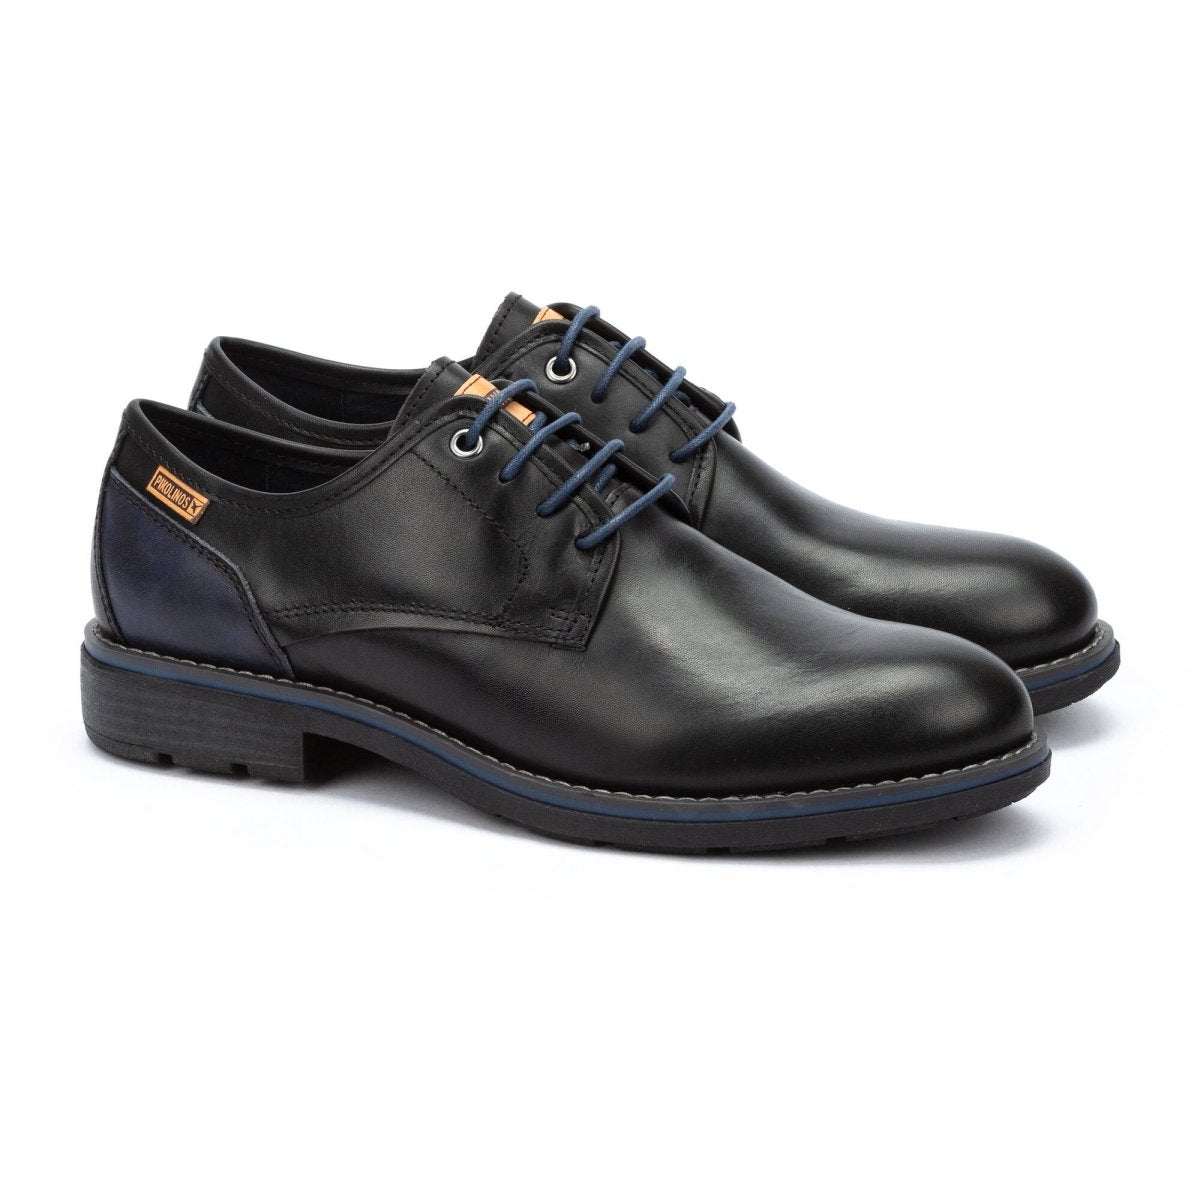 PIKOLINOS YORK M2M-4178 MEN'S LACE-UP SHOES IN BLACK - TLW Shoes